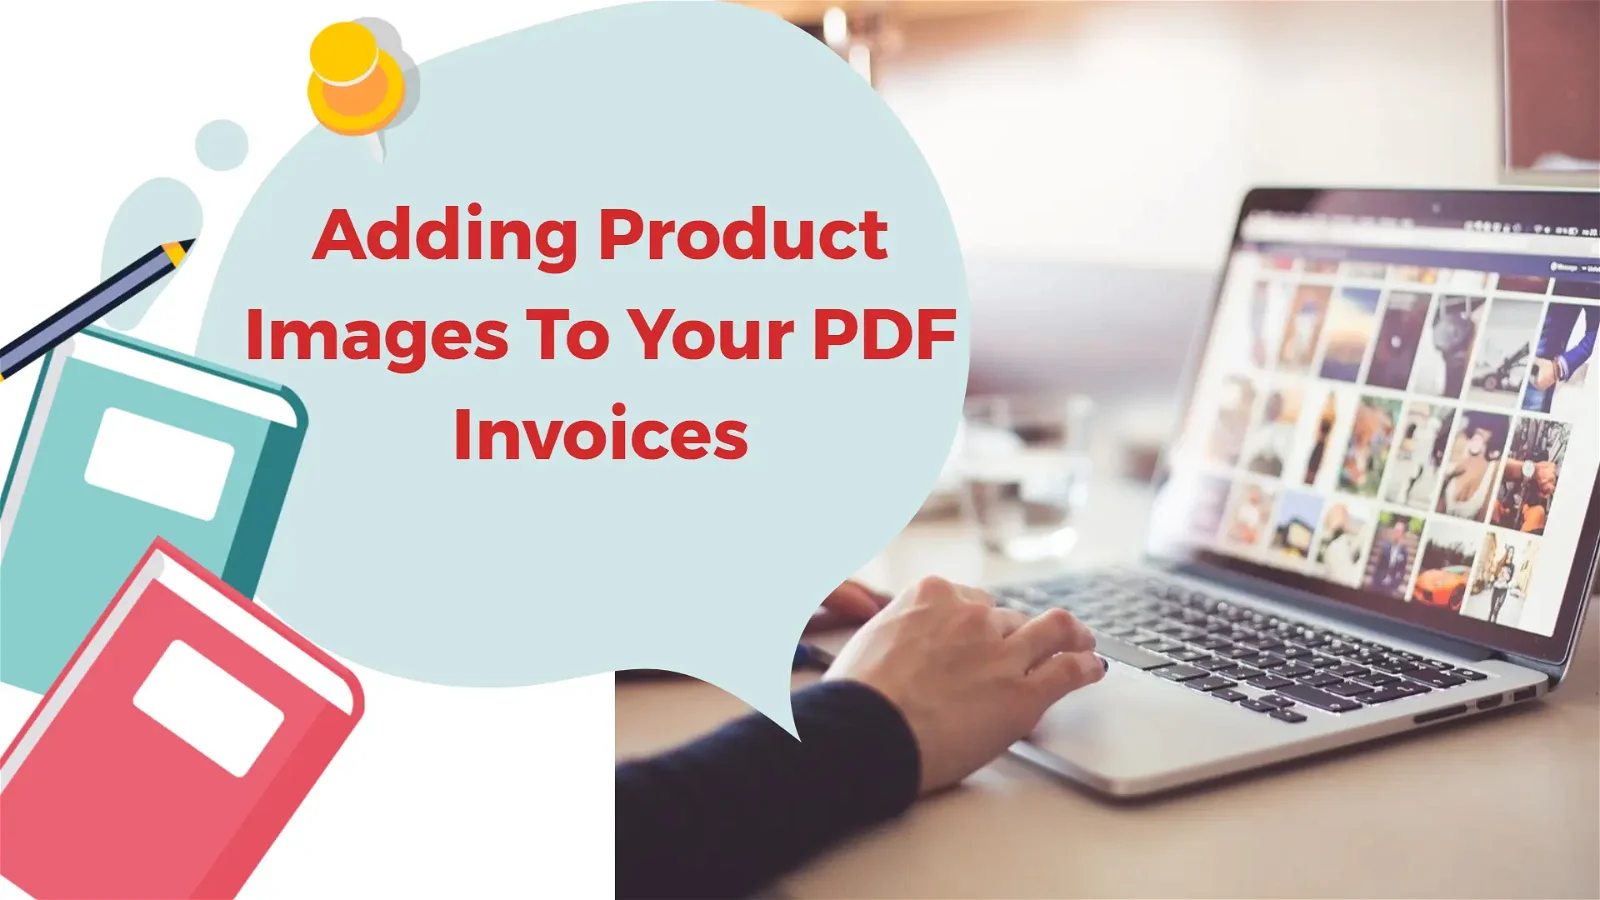 Adding Product Images To Your PDF Invoices